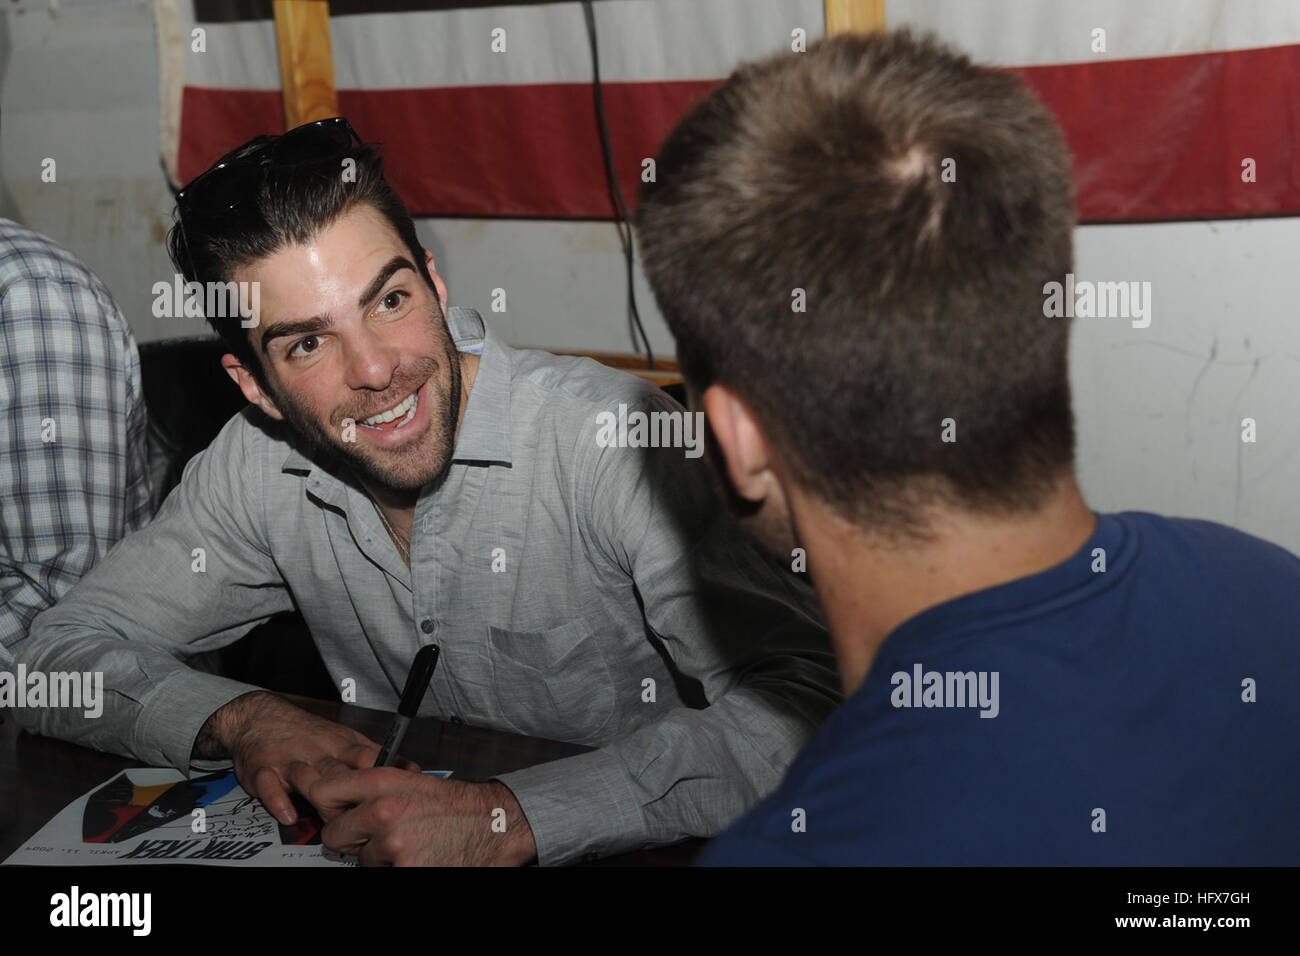 Zachary Quinto (left) and Chris Pine joke around while signing autographs for military personnel on a base in the Middle East on April 11. Zachary and Chris are part of the new Star Trek movie who were visiting the bases in the area for the movie premier. Zachary Quinto 1 Stock Photo